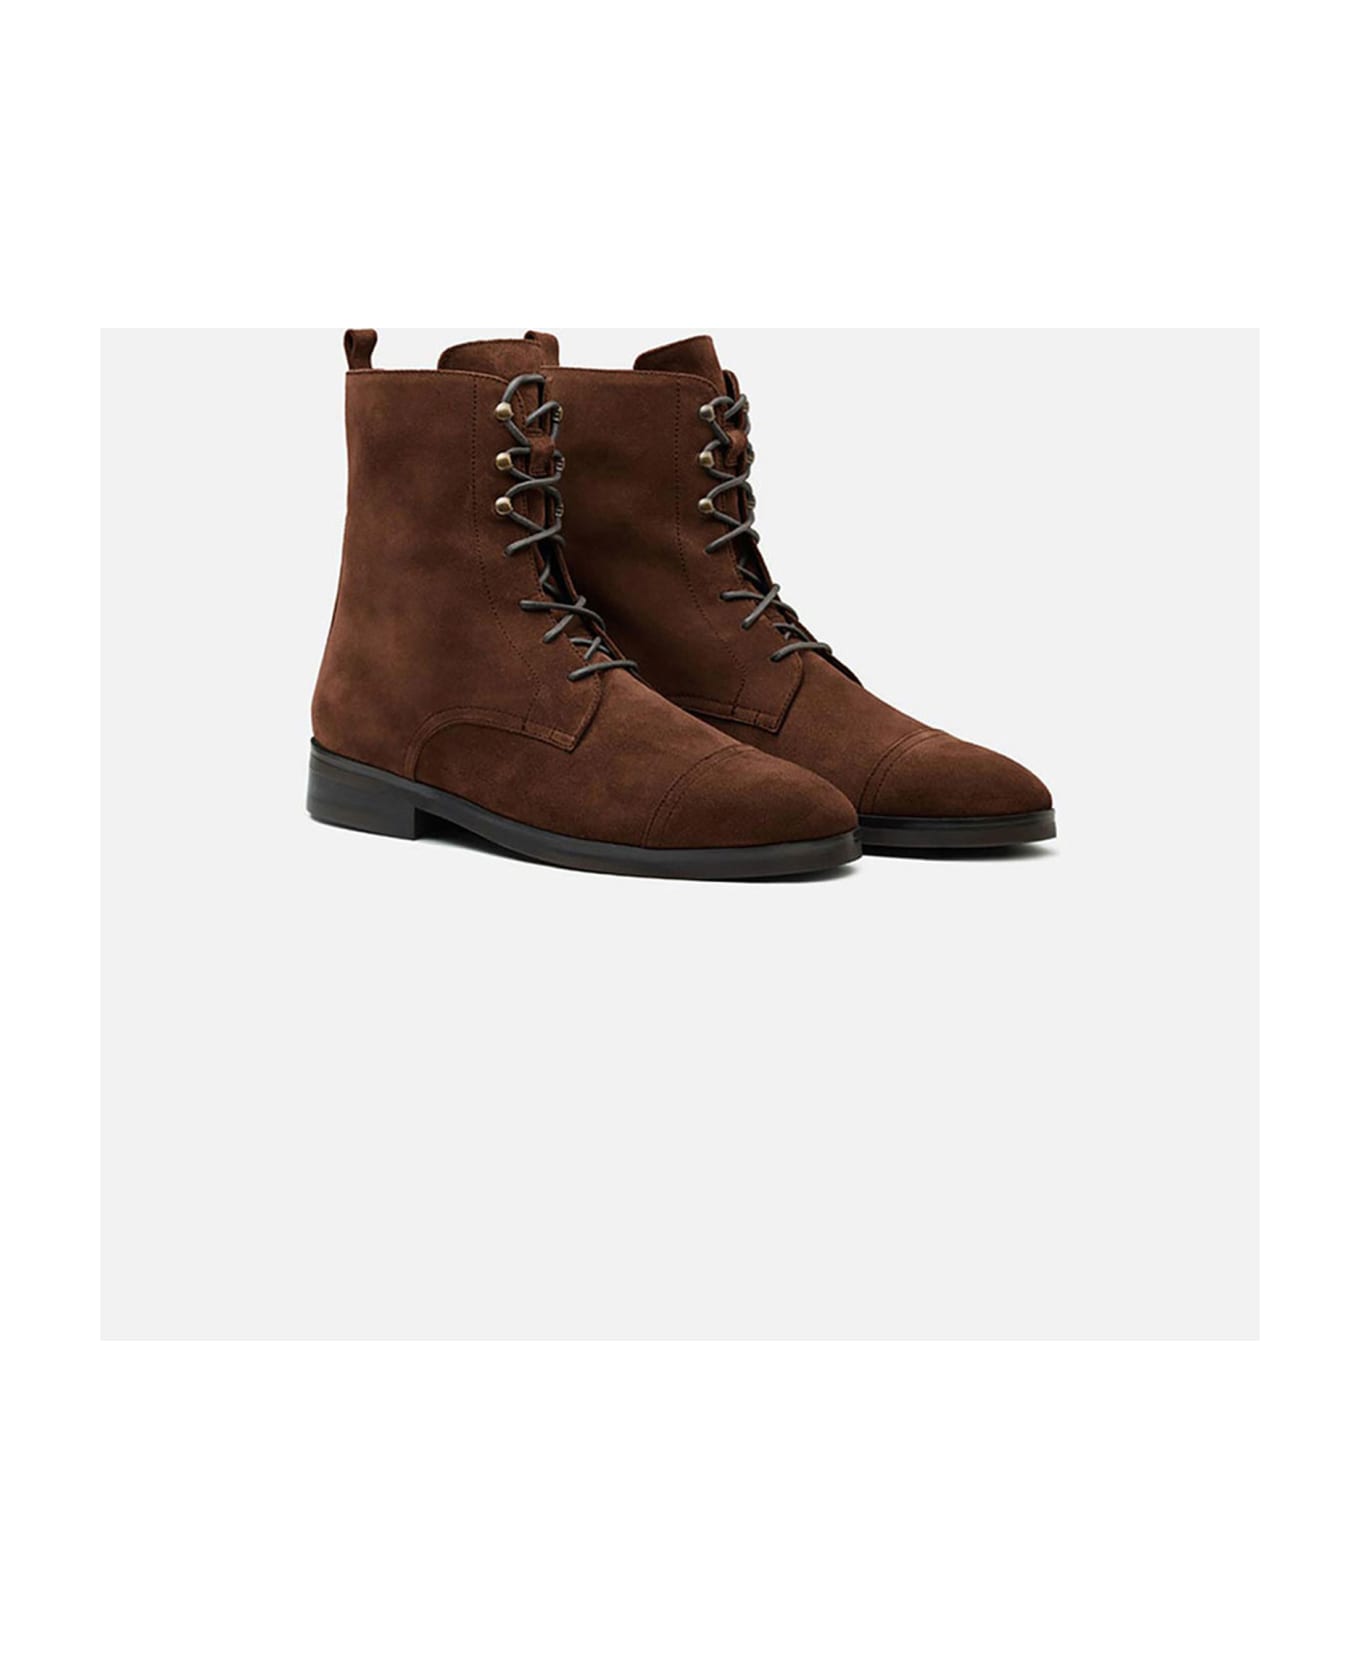 CB Made in Italy Dark Suede Boots Eva - Brown